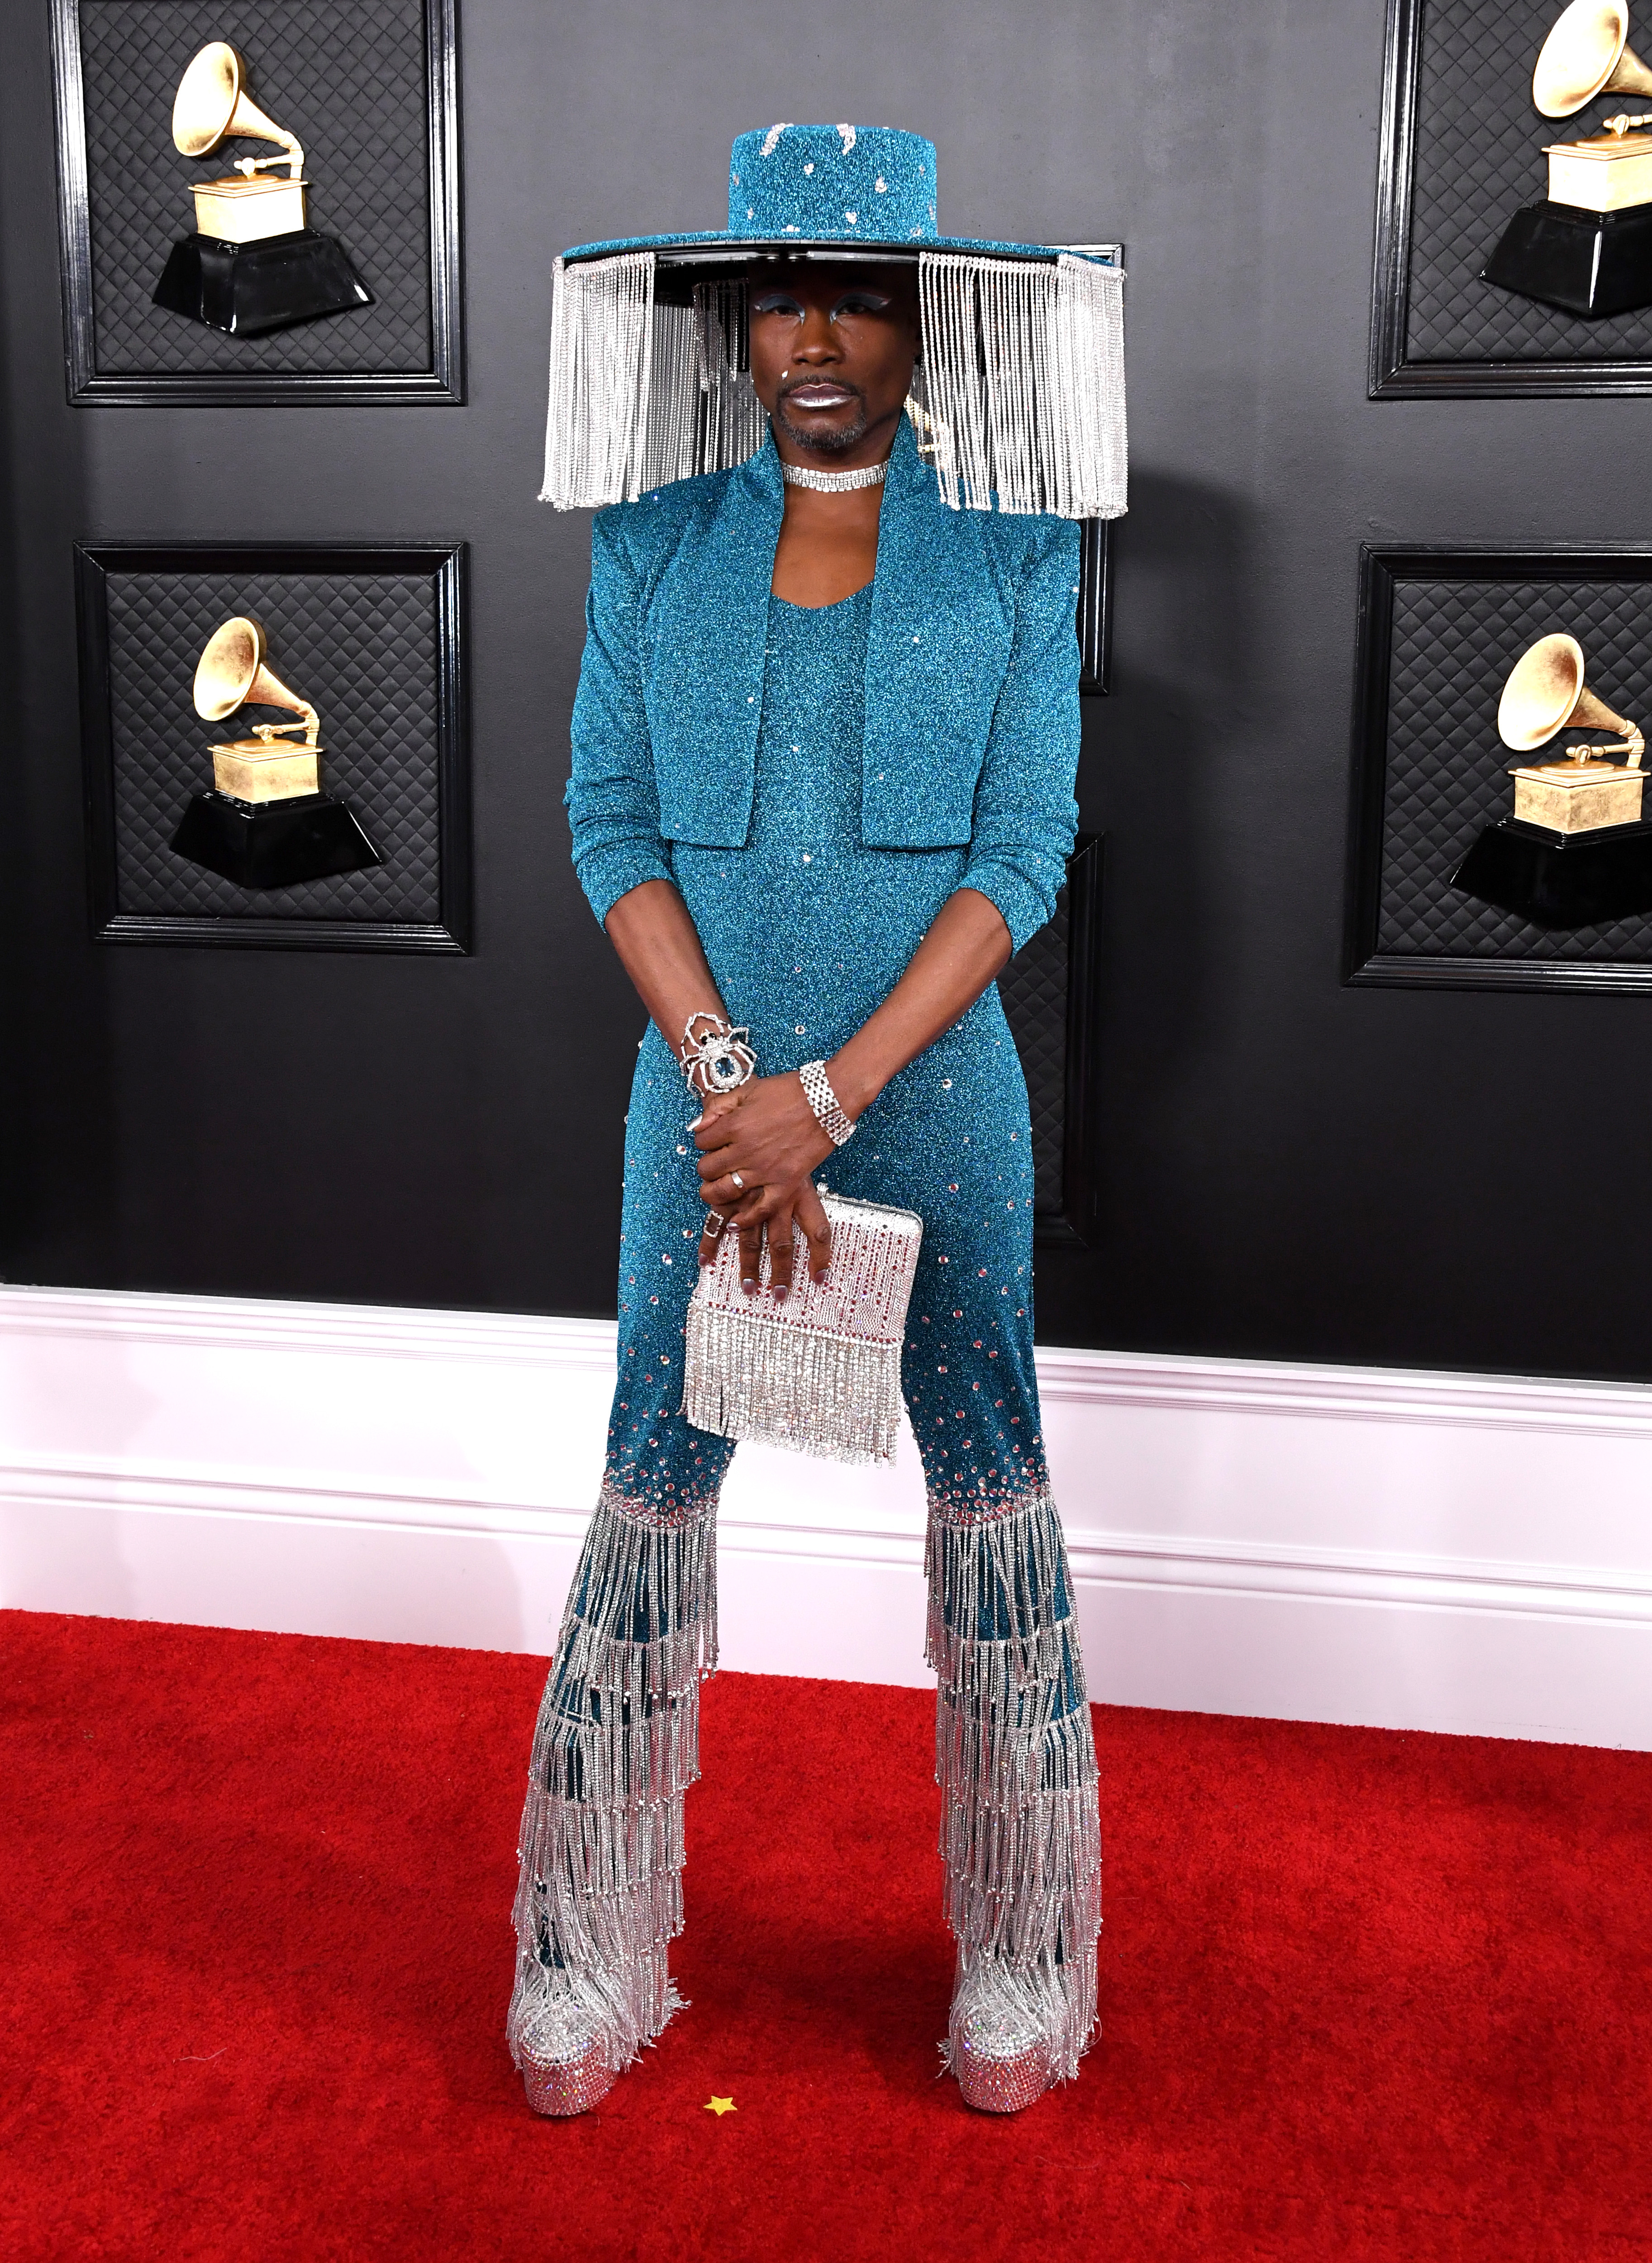 Billy Porter at the Grammy's